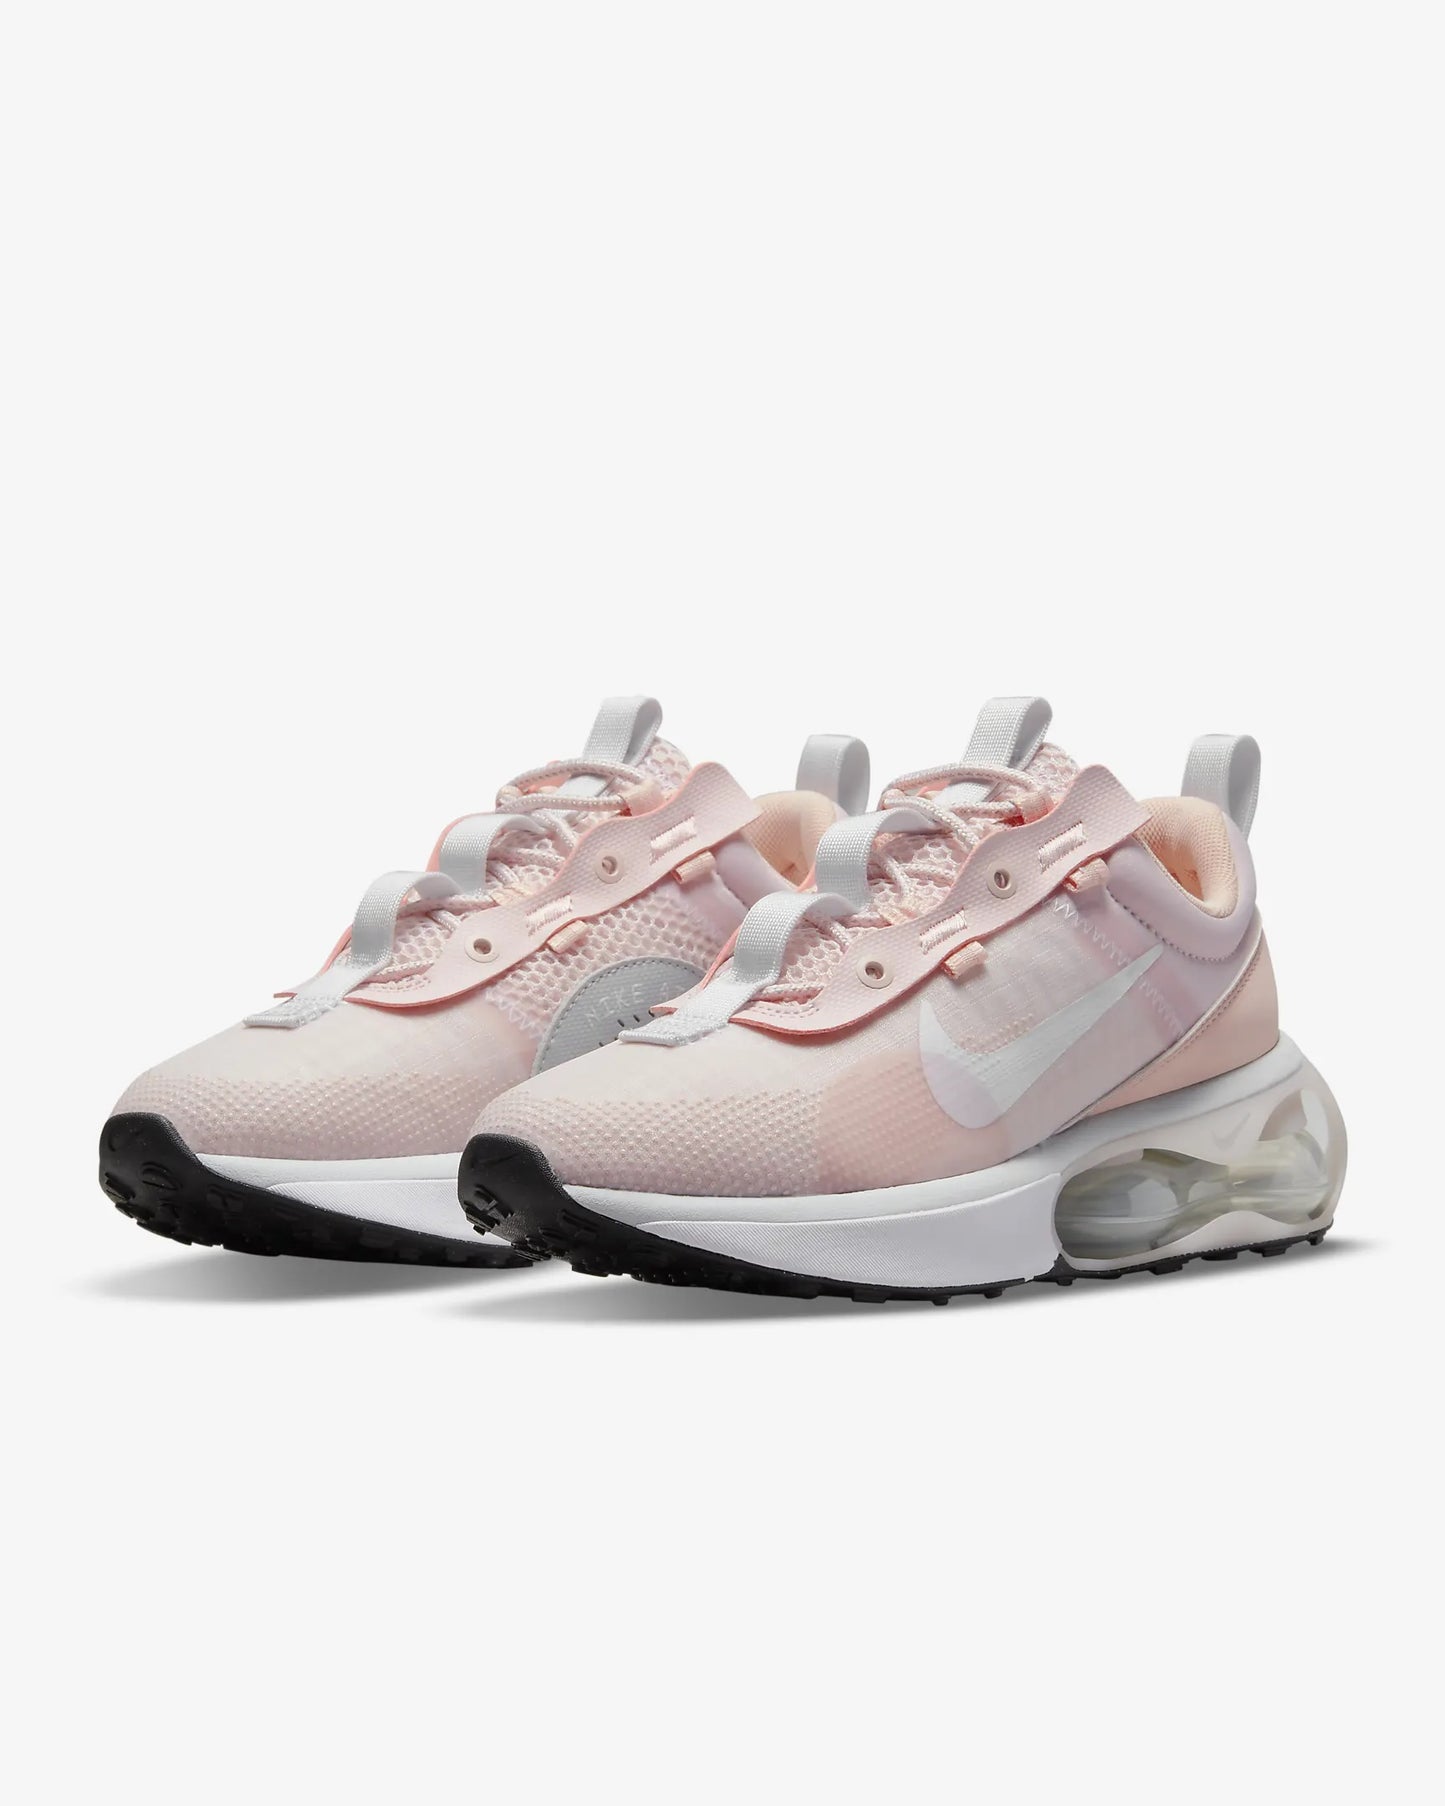 Women's Nike Air Max 2021 Running Shoes, DA1923 600 Multi Sizes Barely Rose/Pure Platinum/Pink Oxford/White